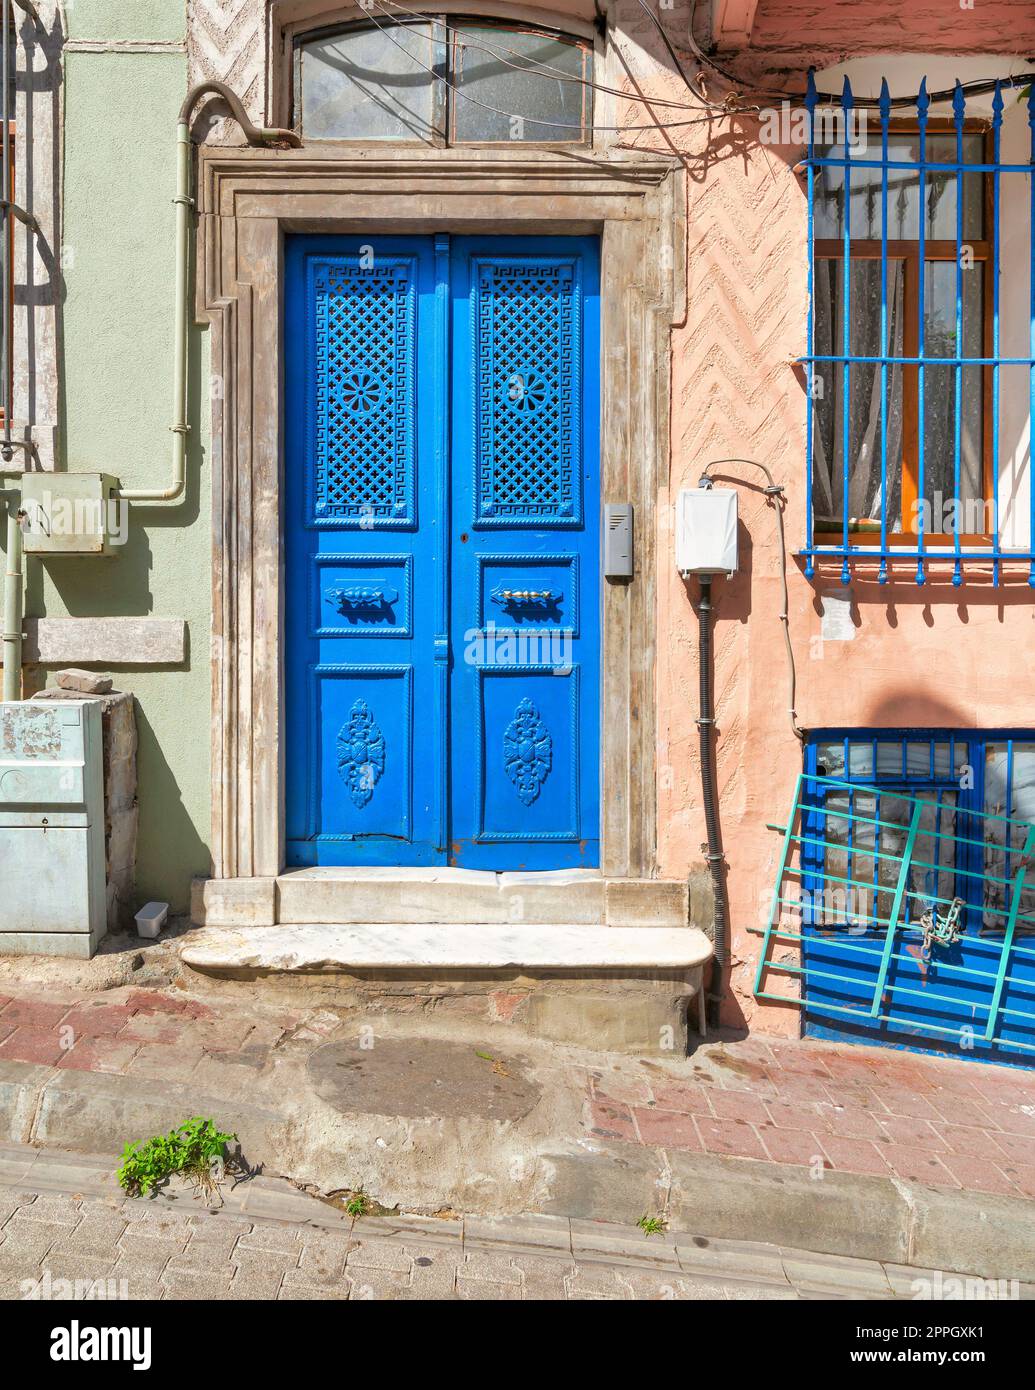 Blue painted decorated metal door and wrought iron window in a stone wall painted in orange and green on city street Stock Photo